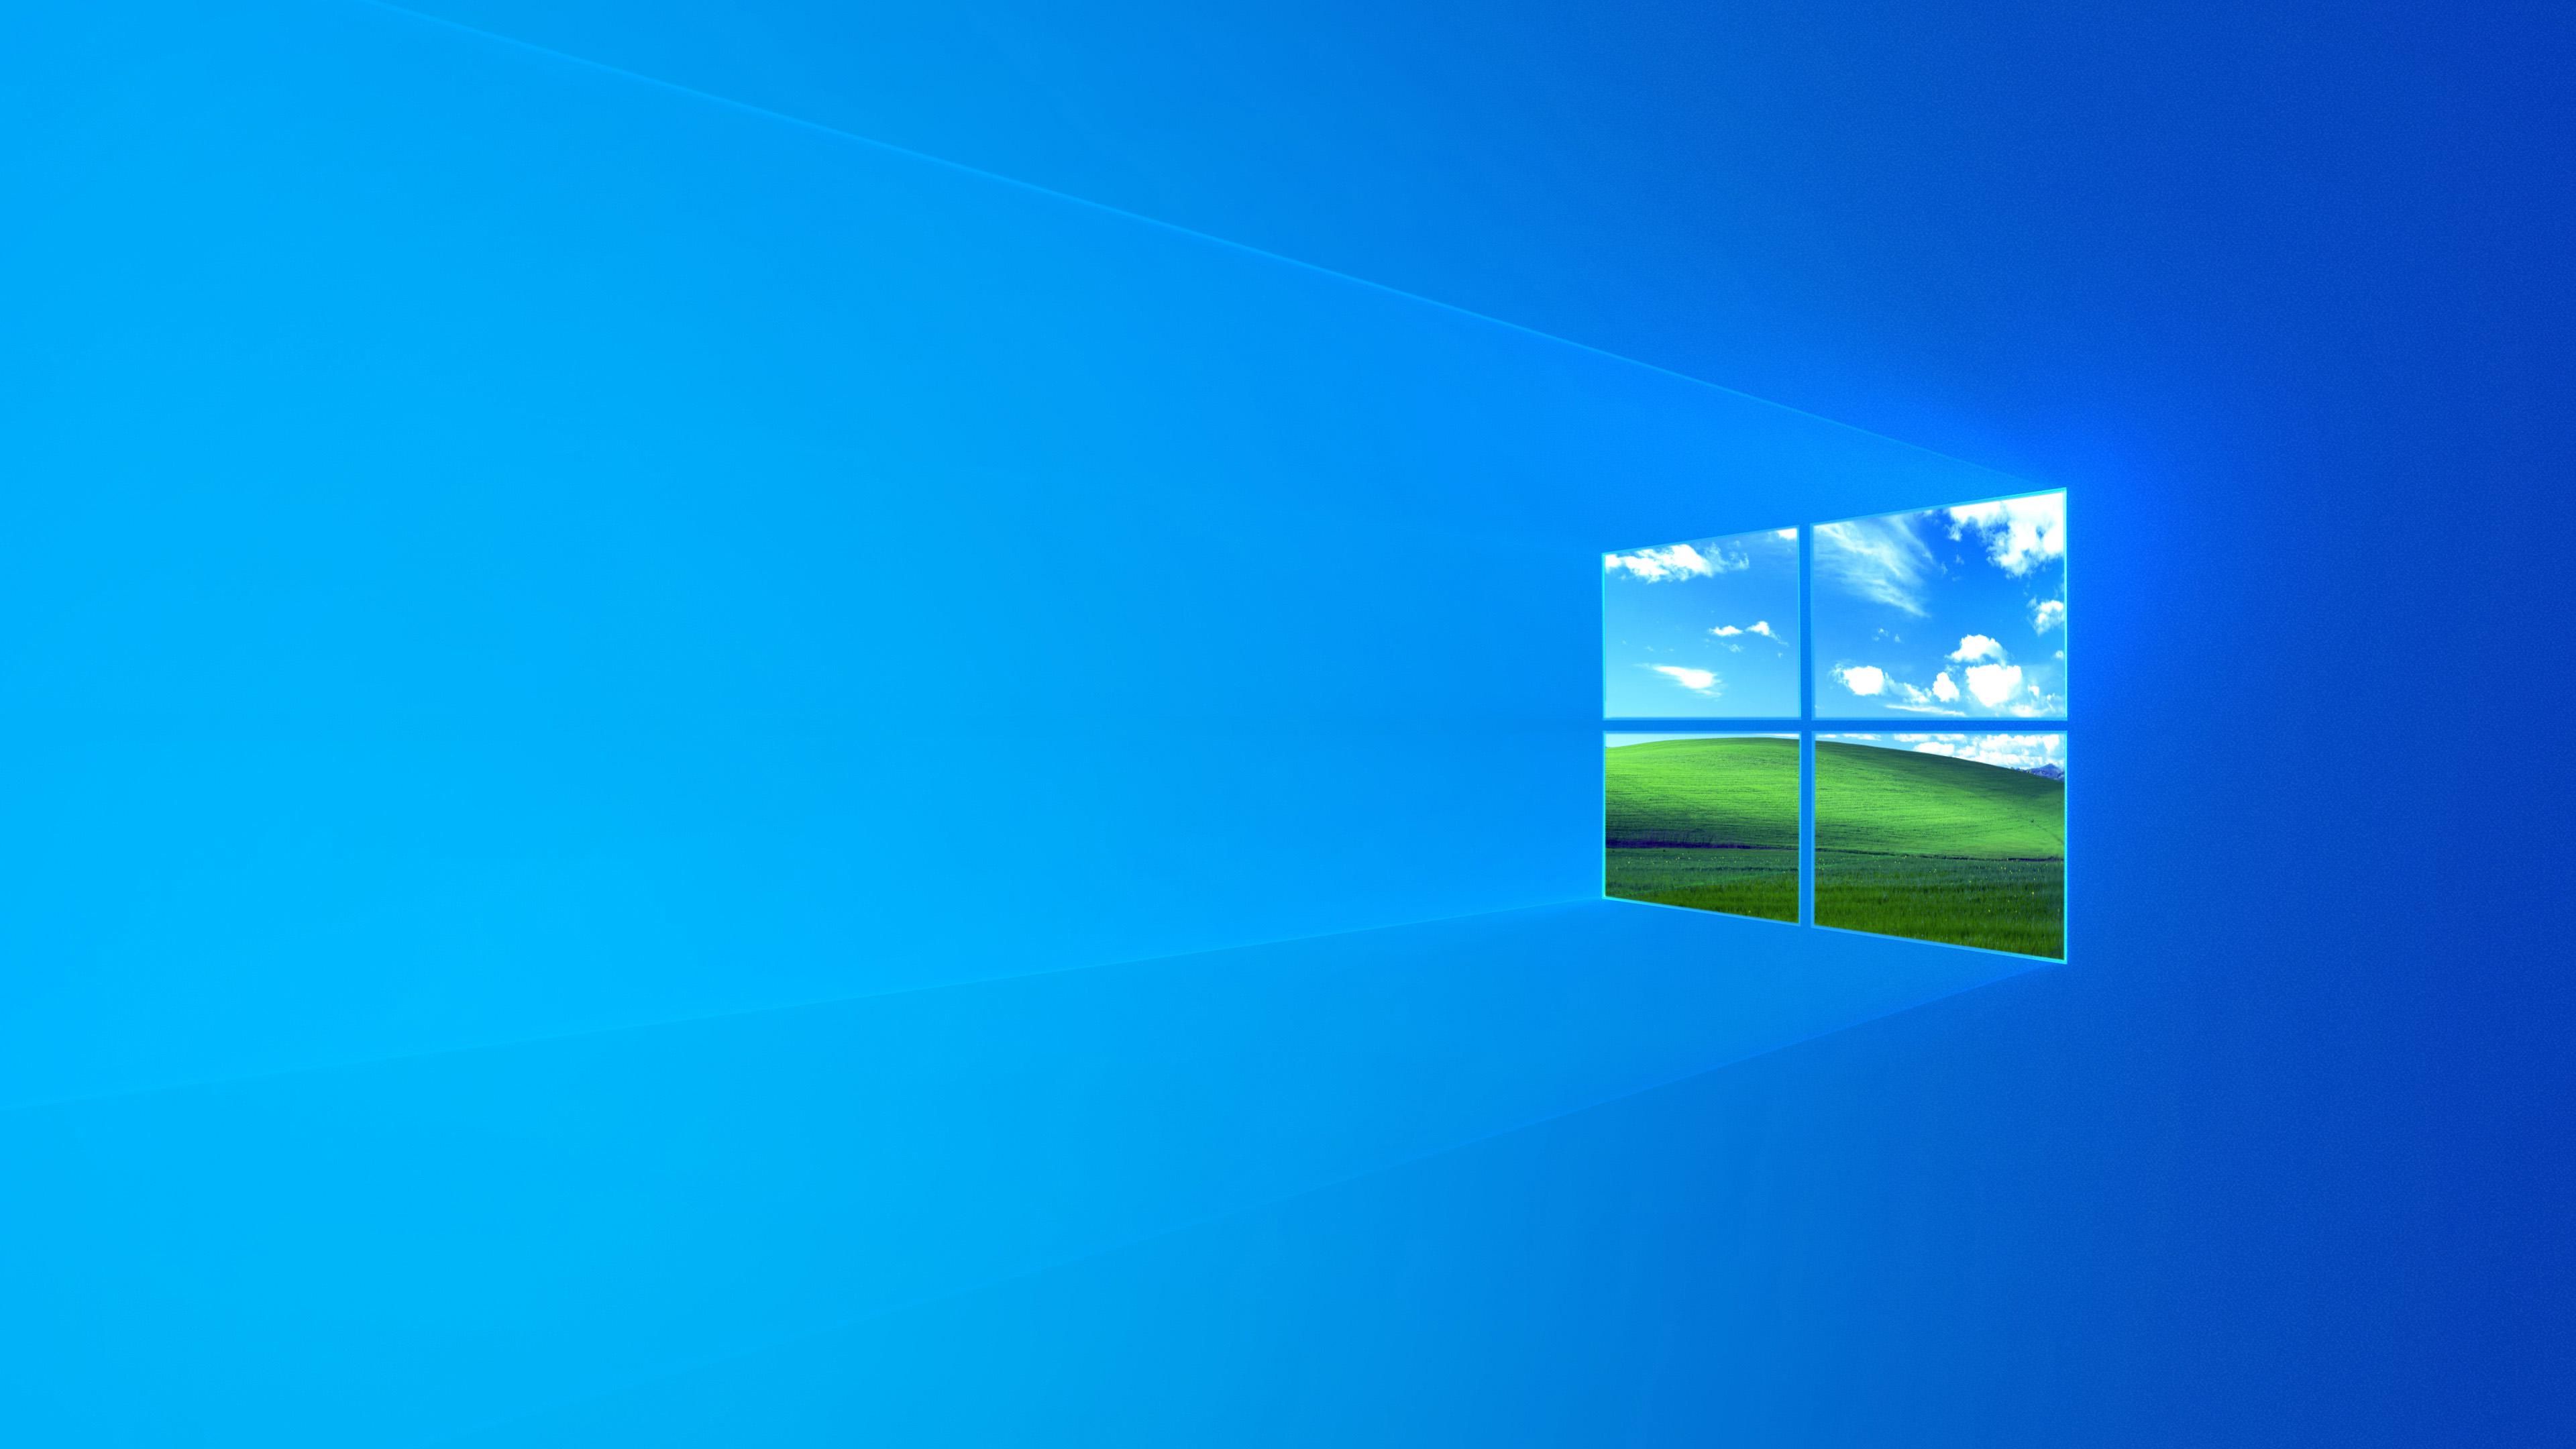 Windows Default Wallpaper With A Flavor Of Xp